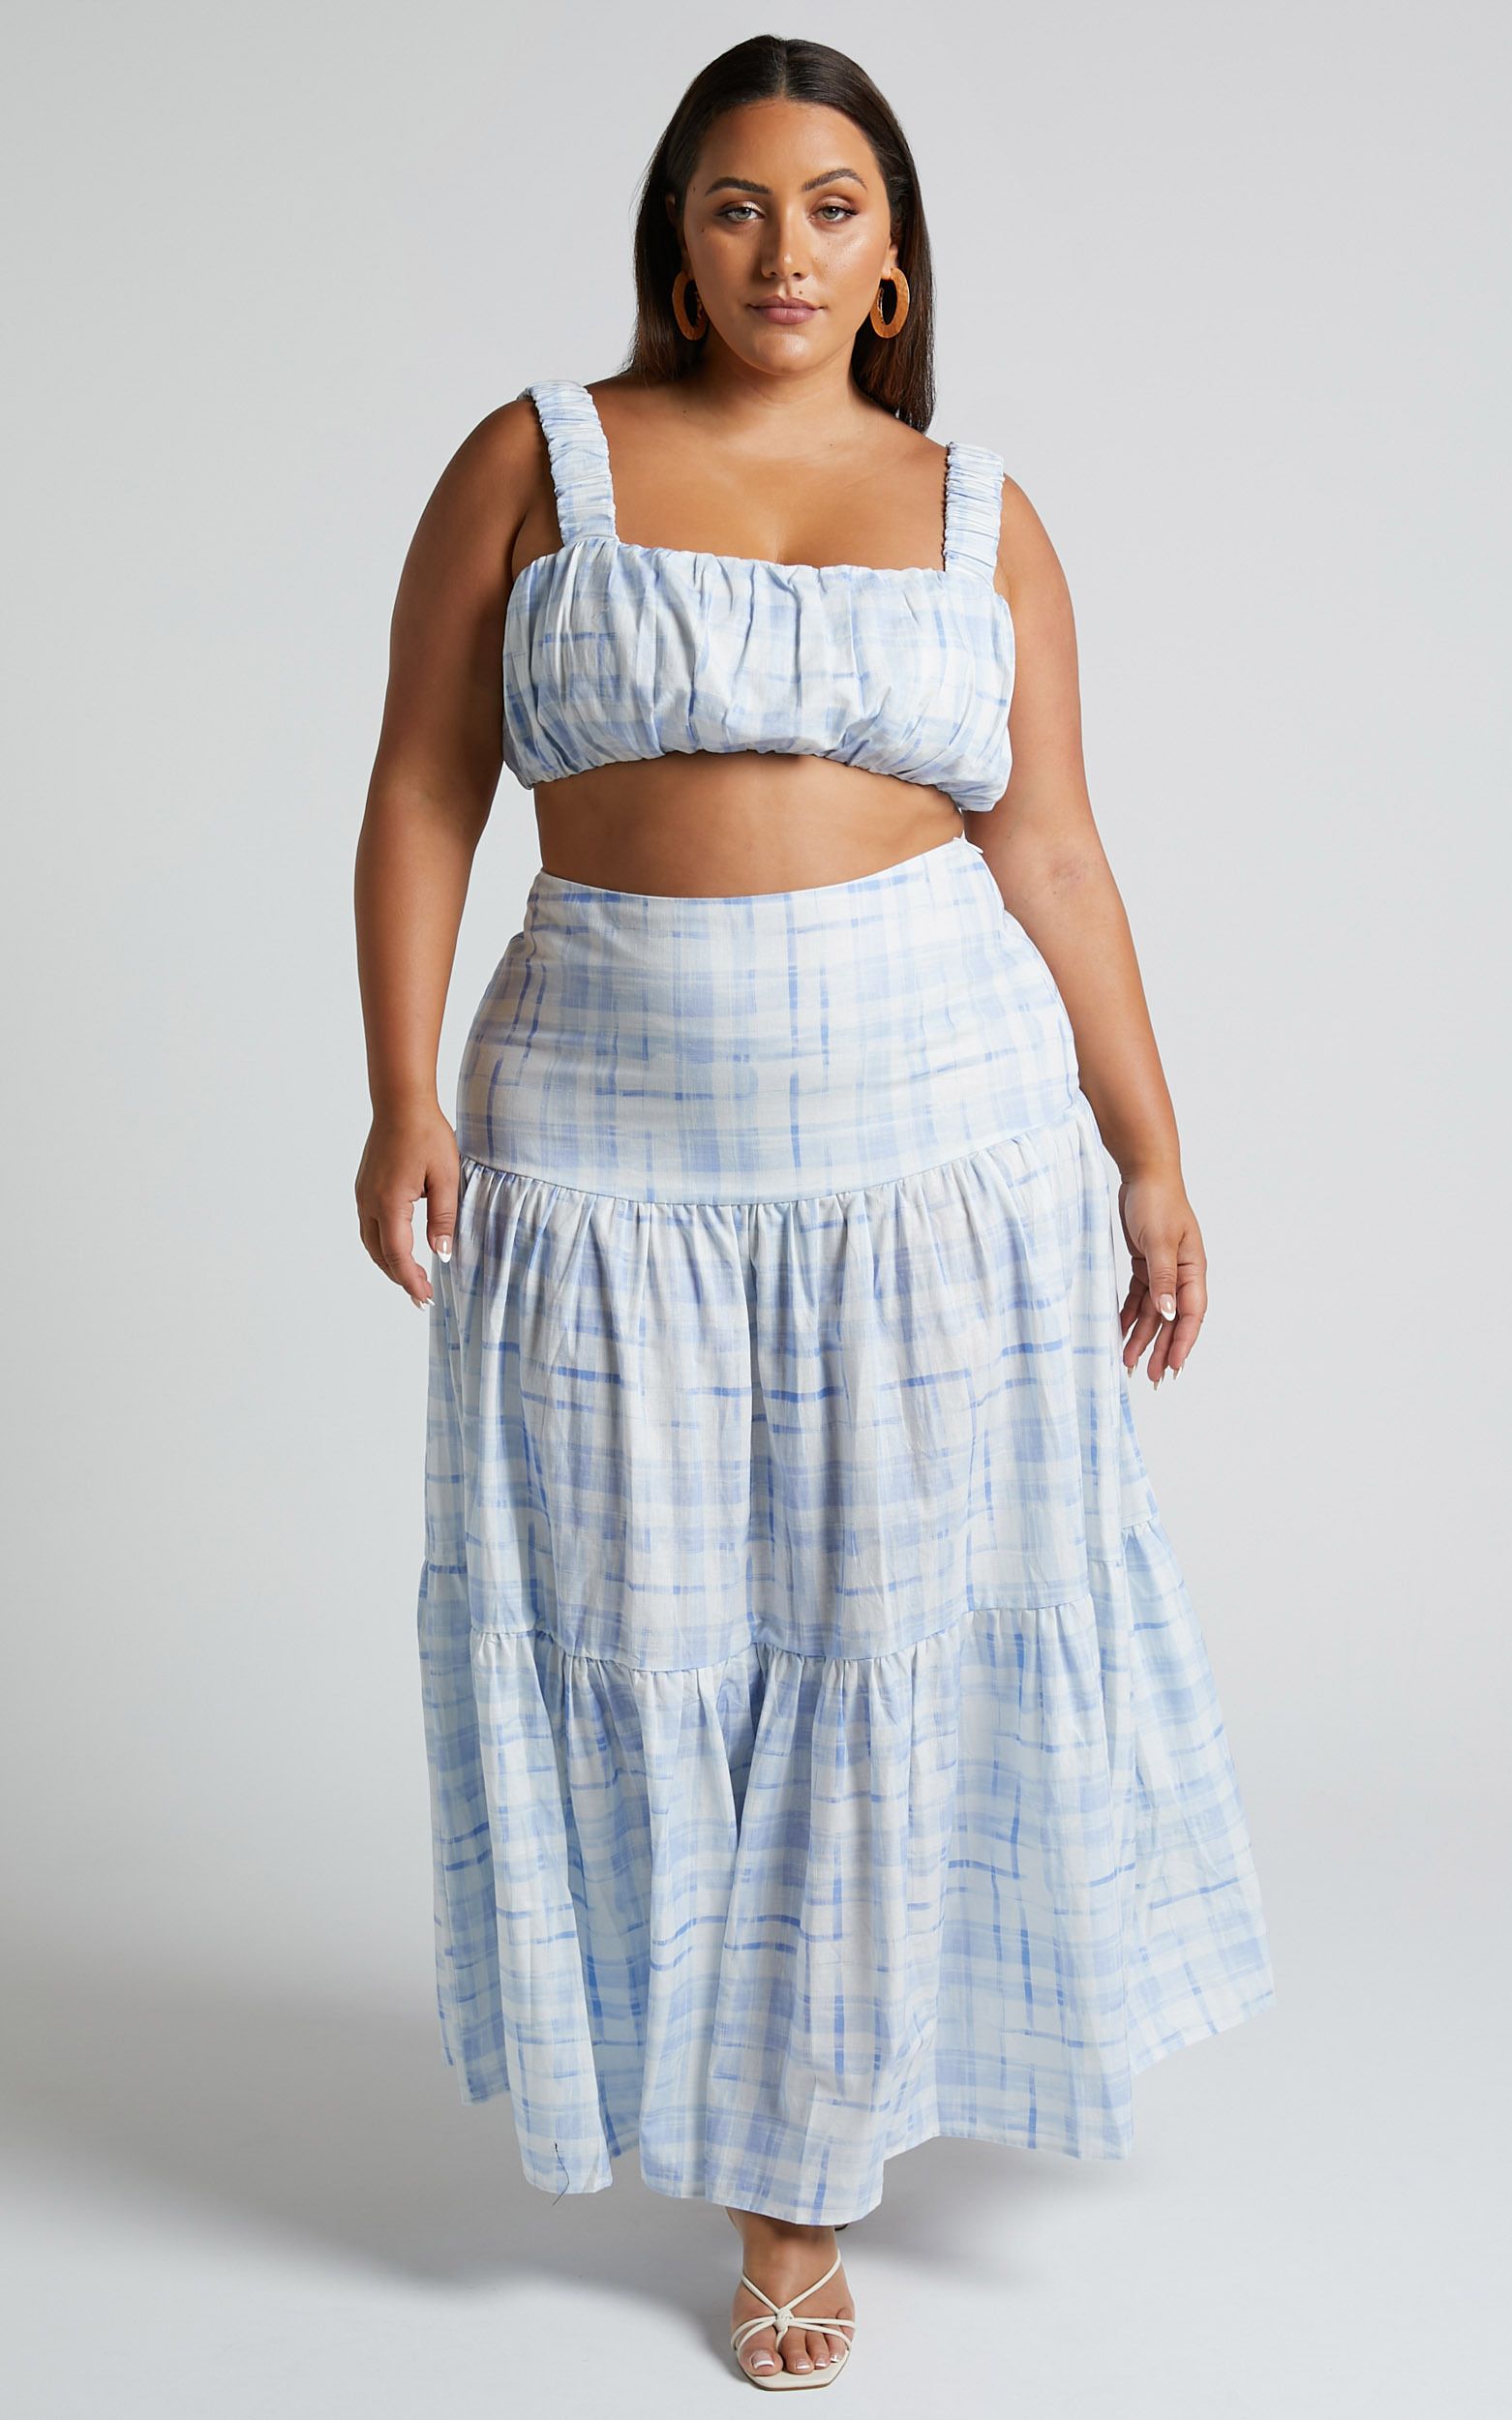 Amalie The Label - Emerita Gathered Crop Top and Tiered Maxi Skirt Set in Chieti Check Blue | Showpo (US, UK & Europe)